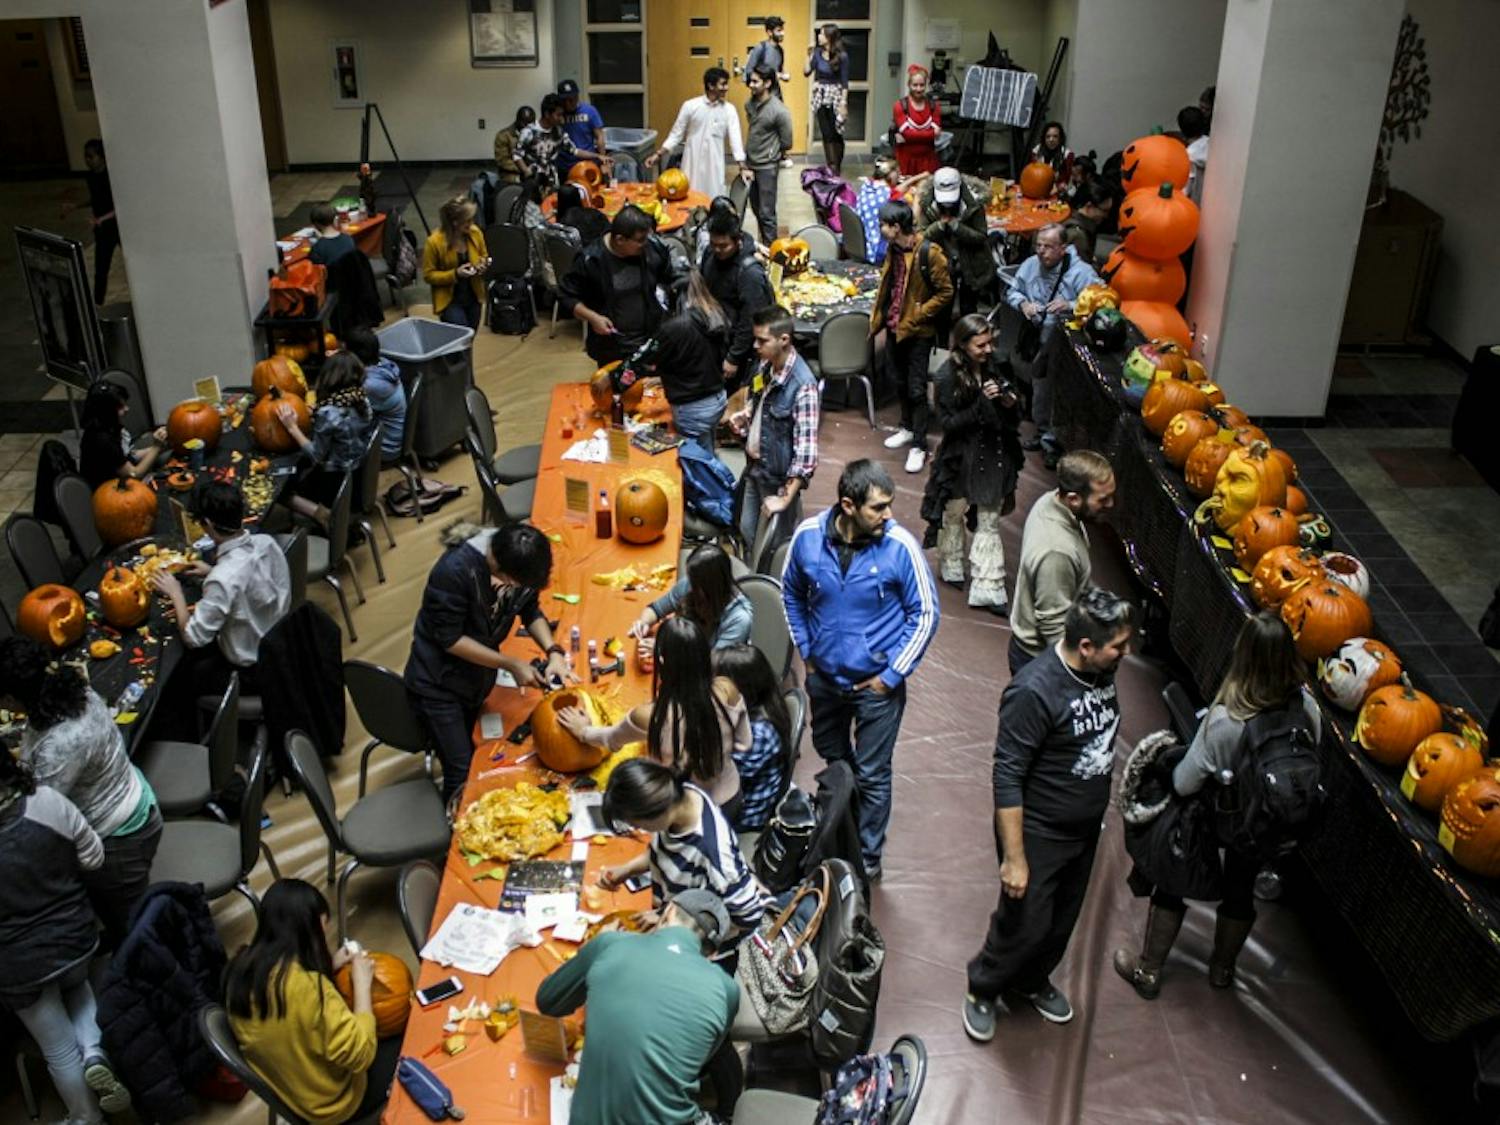 People gather to watch and carve pumpkins at the SUB during the Pumpkin Carving Contest on Oct. 31, 2017.